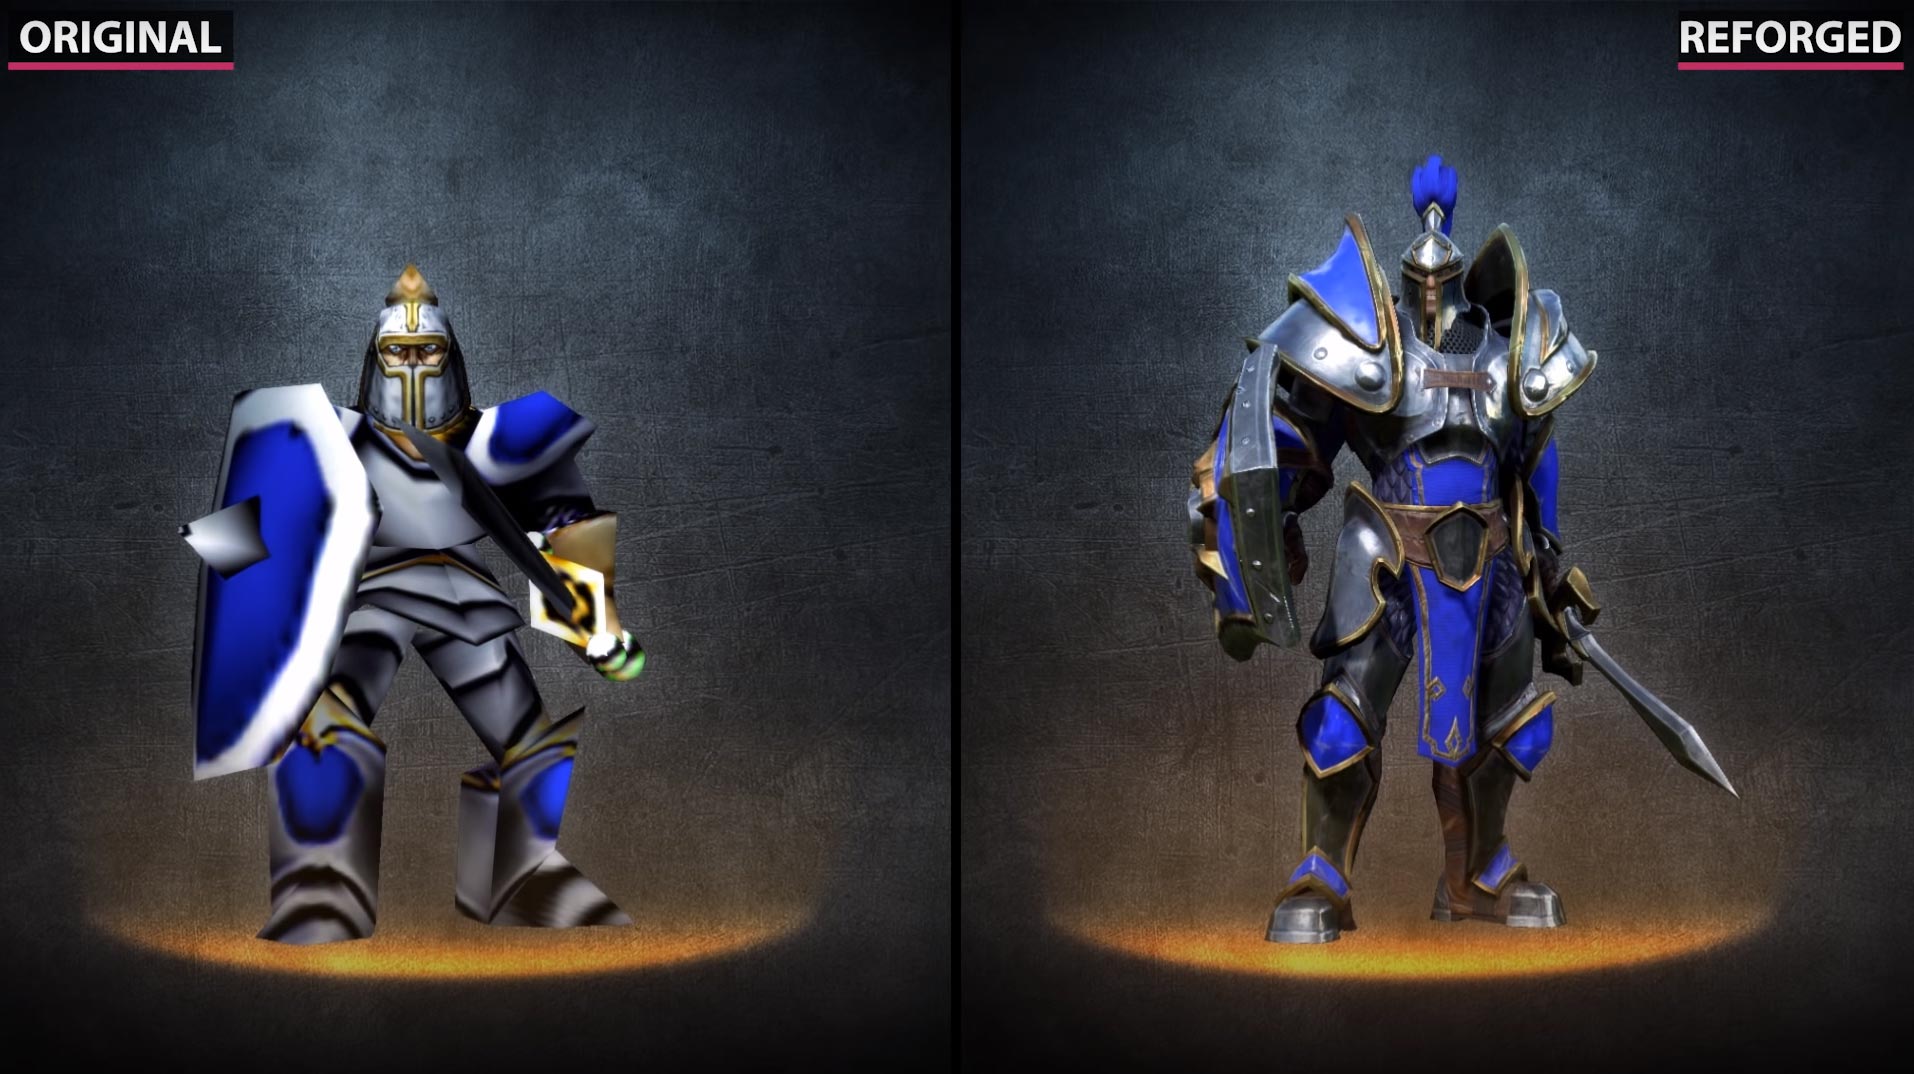 Warcraft 3 And Warcraft 3 Reforged Comparison Units Heroes